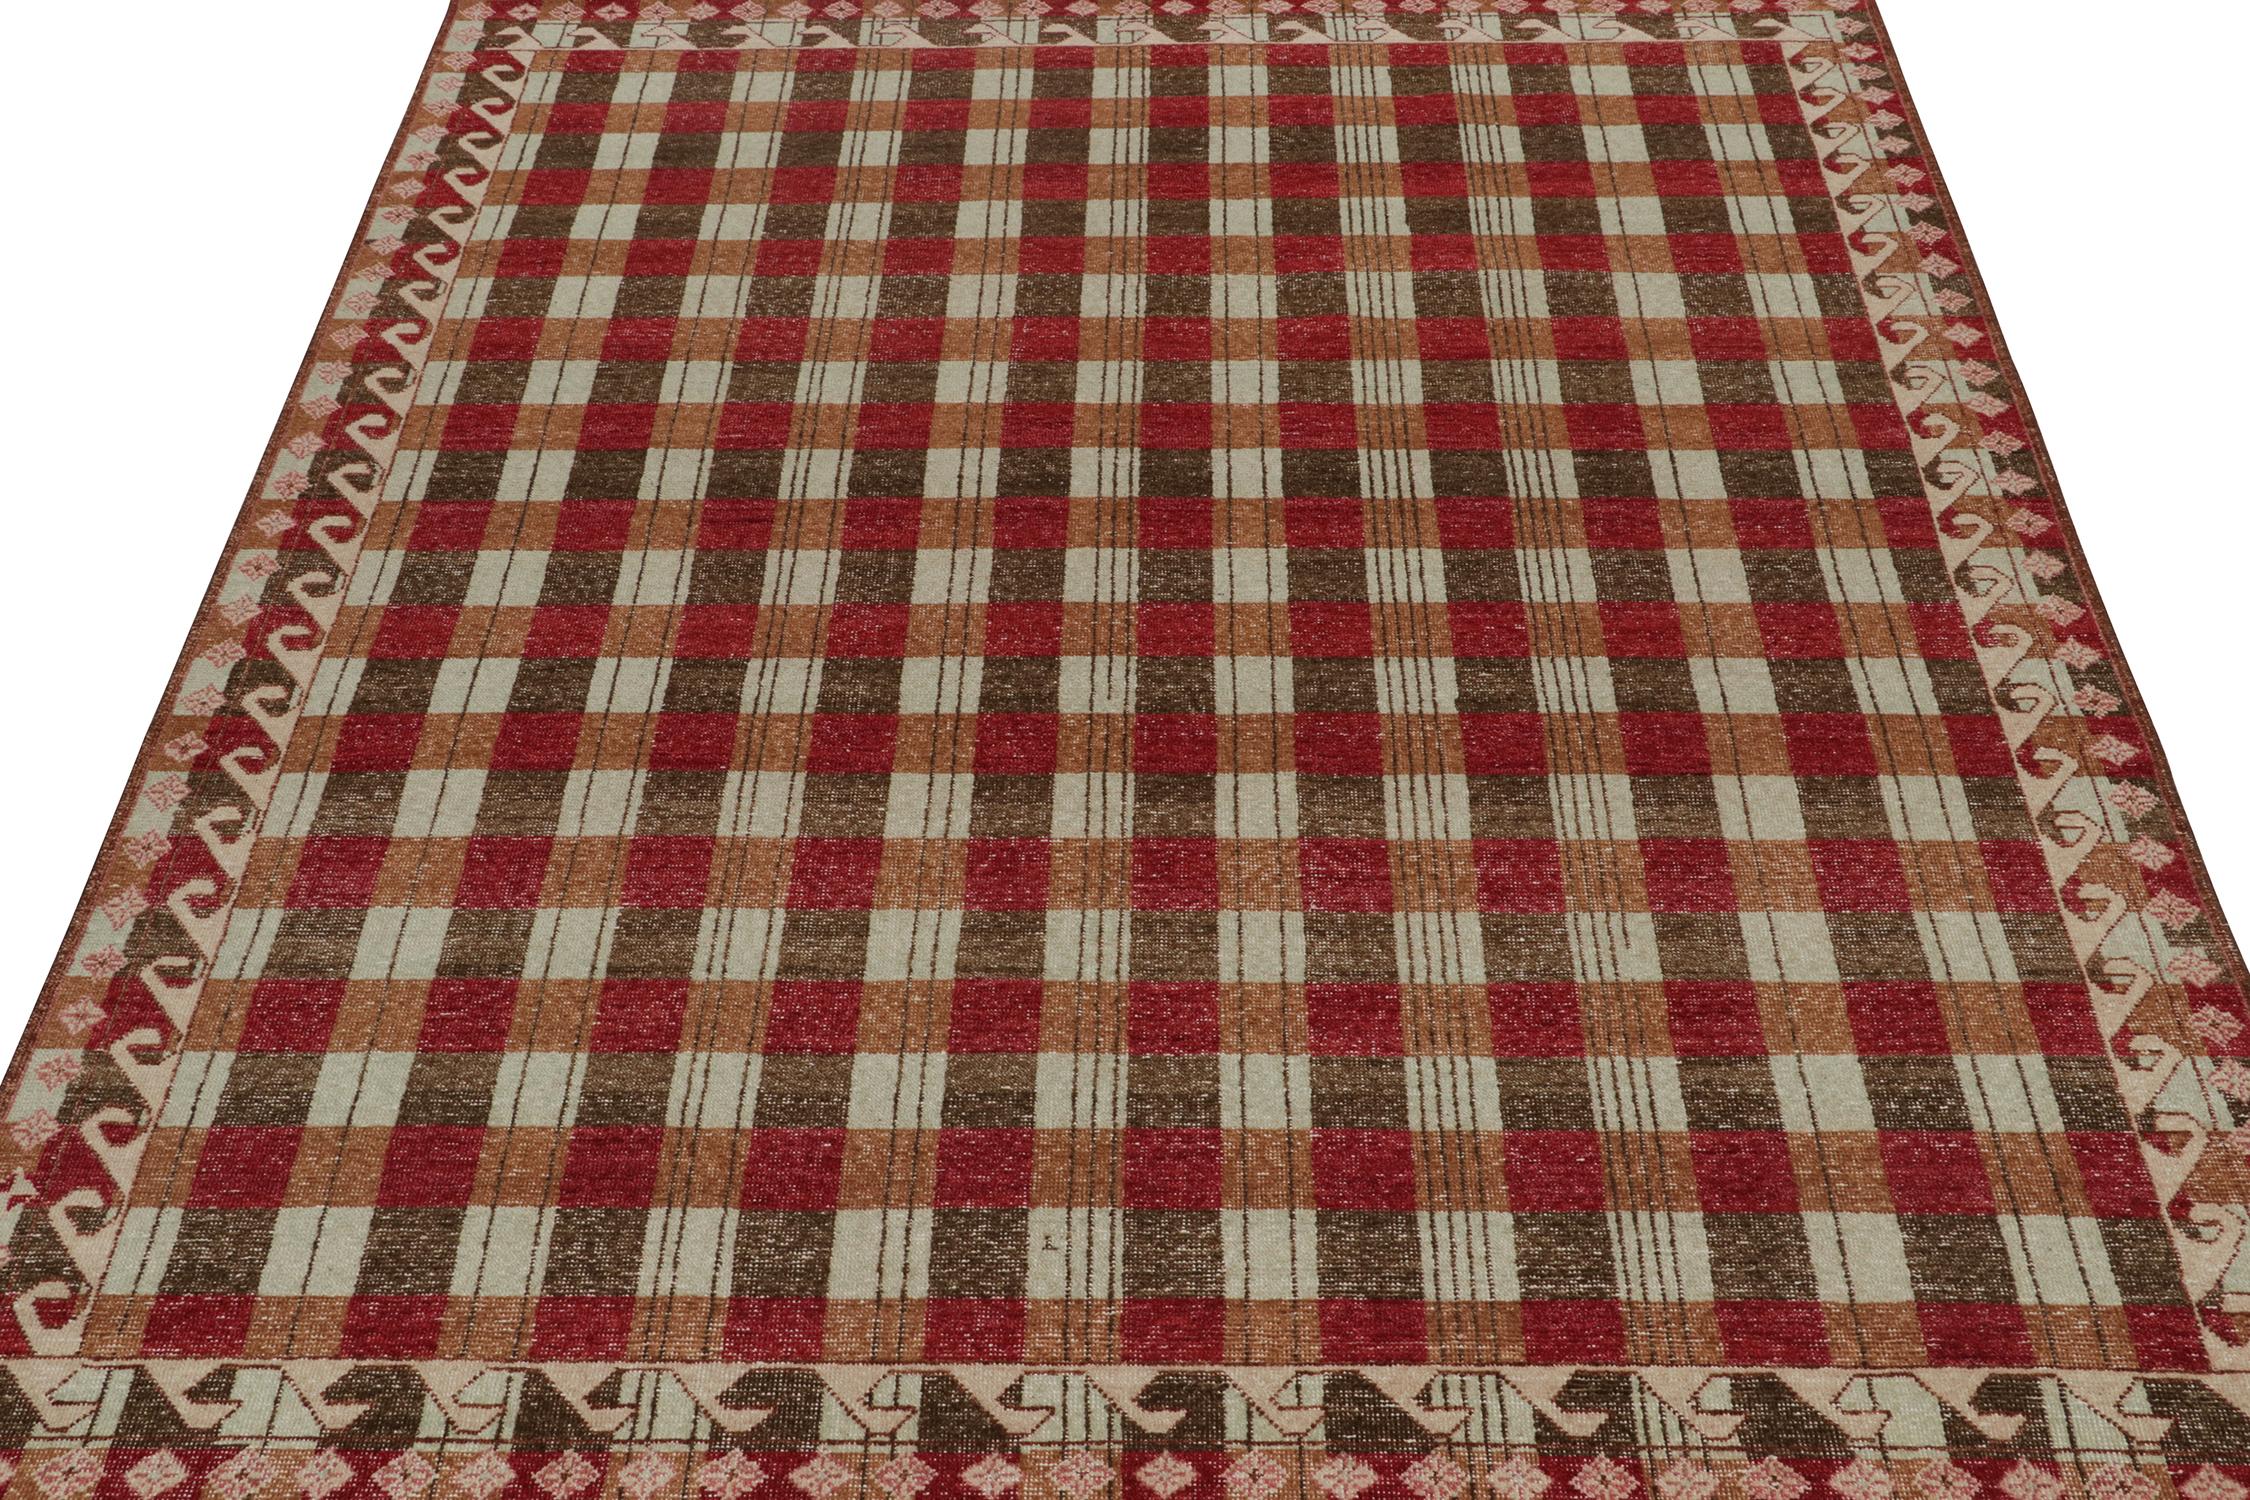 An 8x10 modern rug, hand-knotted in distressed style wool and cotton from Rug & Kilim’s Homage Collection.

Further on the Design:
This design recaptures mid-century Scandinavian rug designs, and favors red and brown geometric patterns with rust